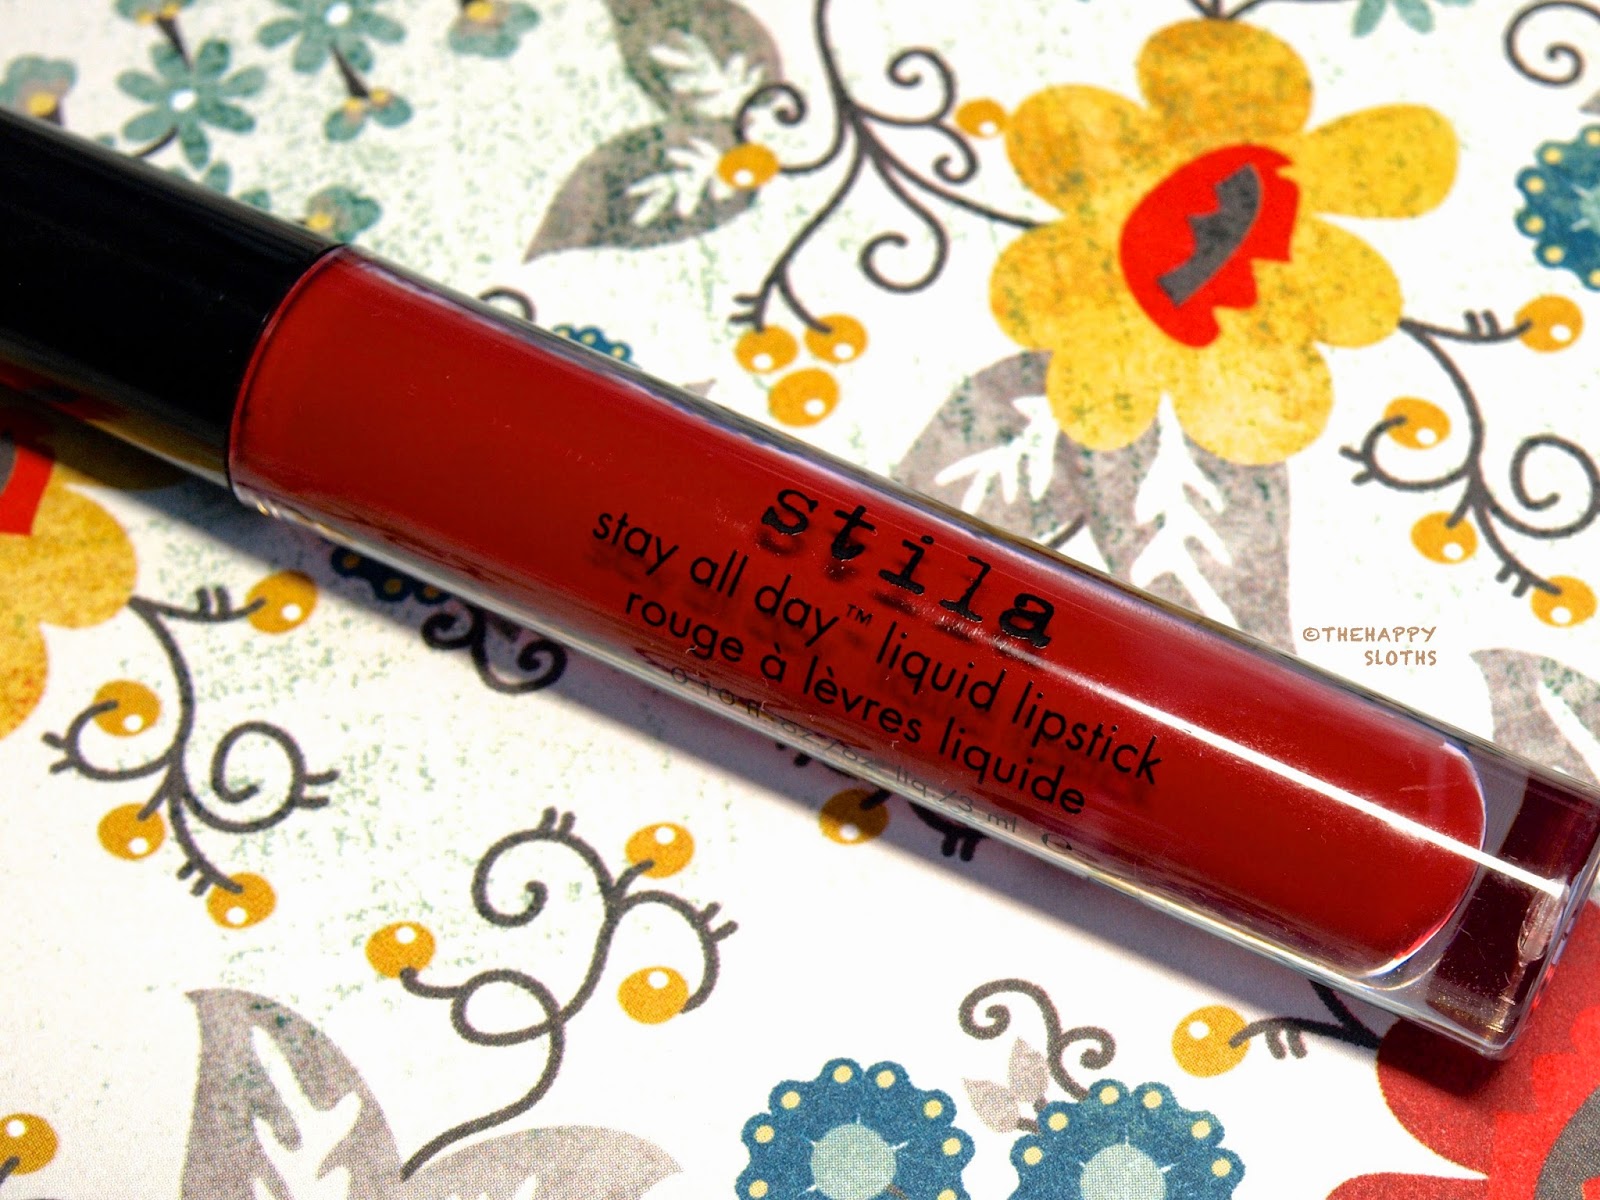 Stila Stay All Day Liquid Lipstick in "Fiery": Review and Swatches